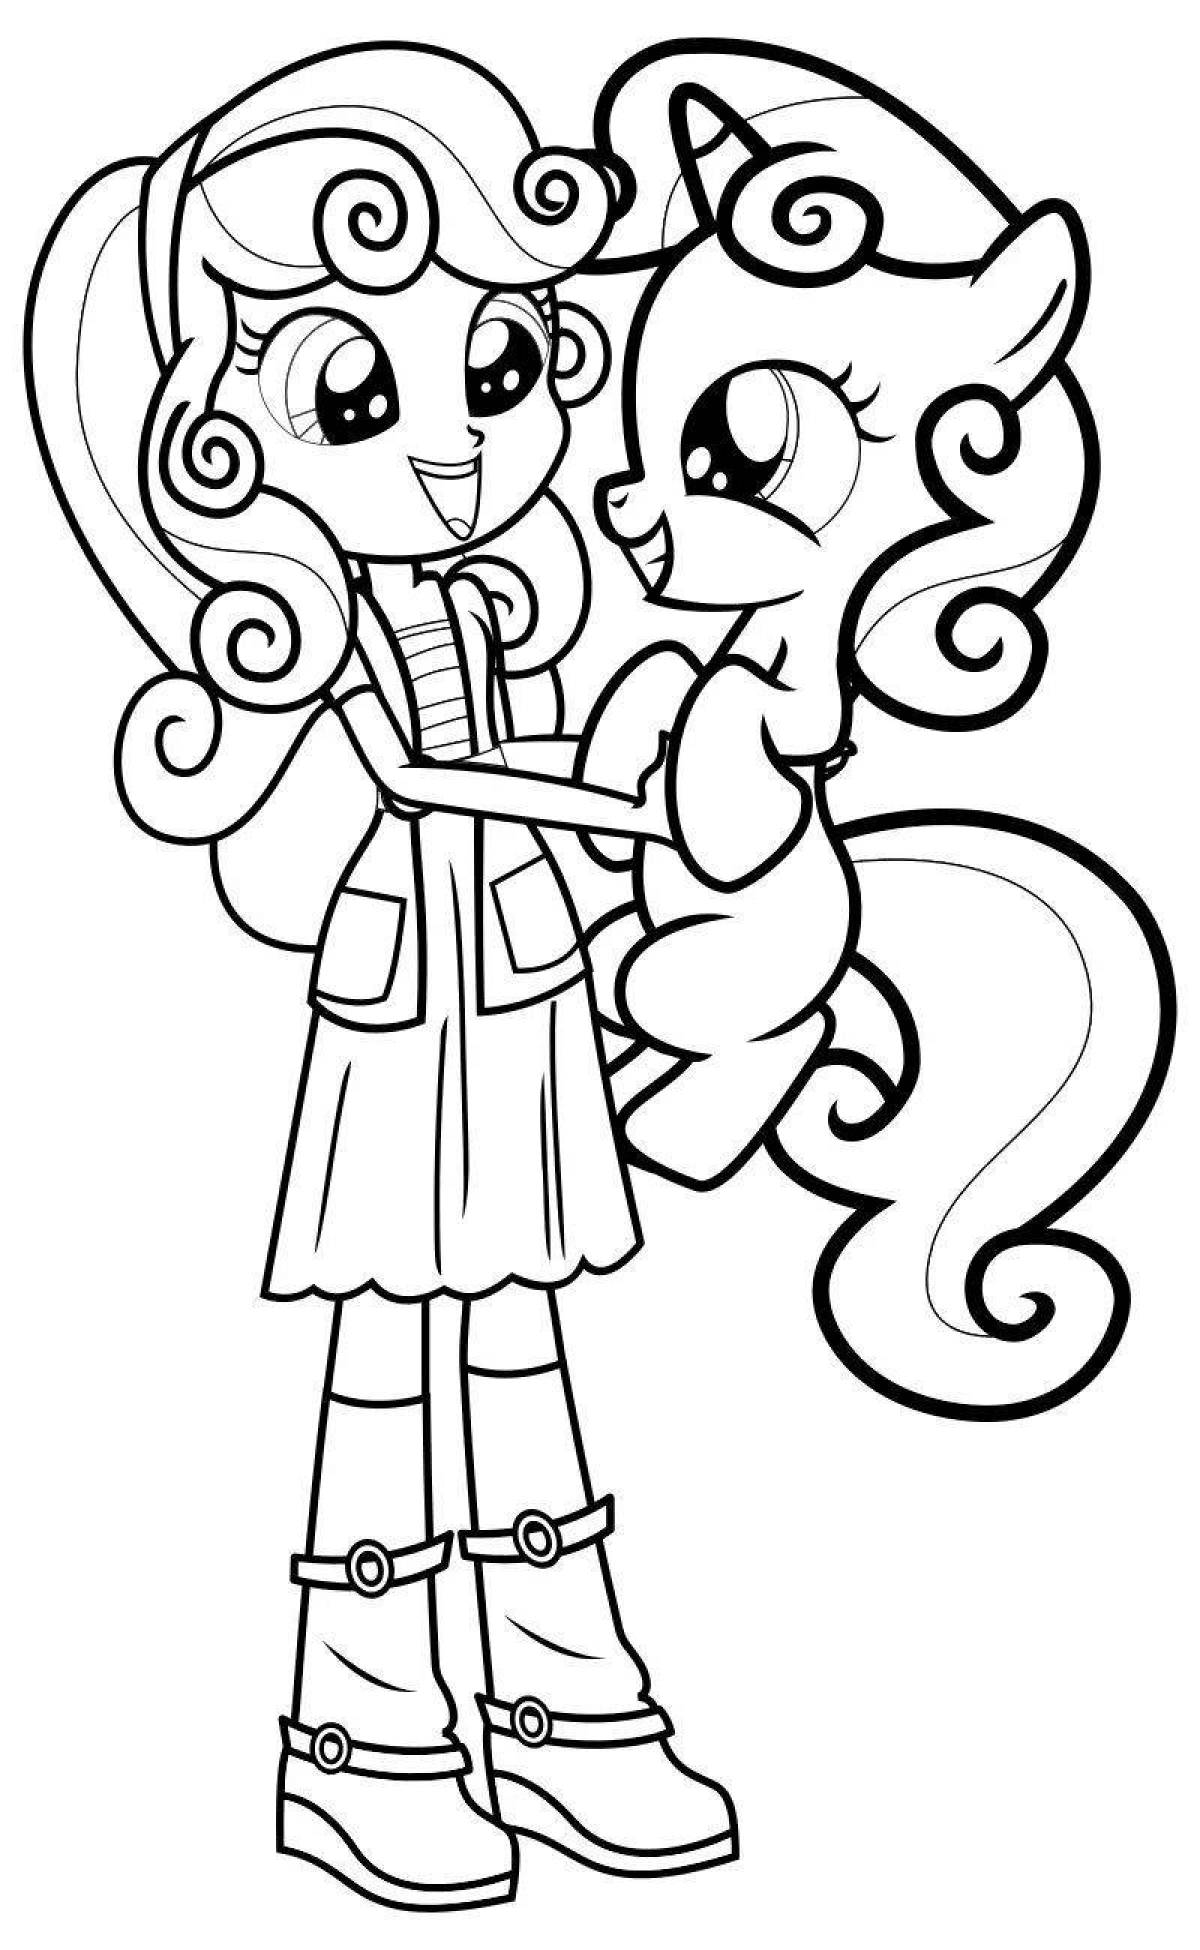 Fancy pony doll coloring